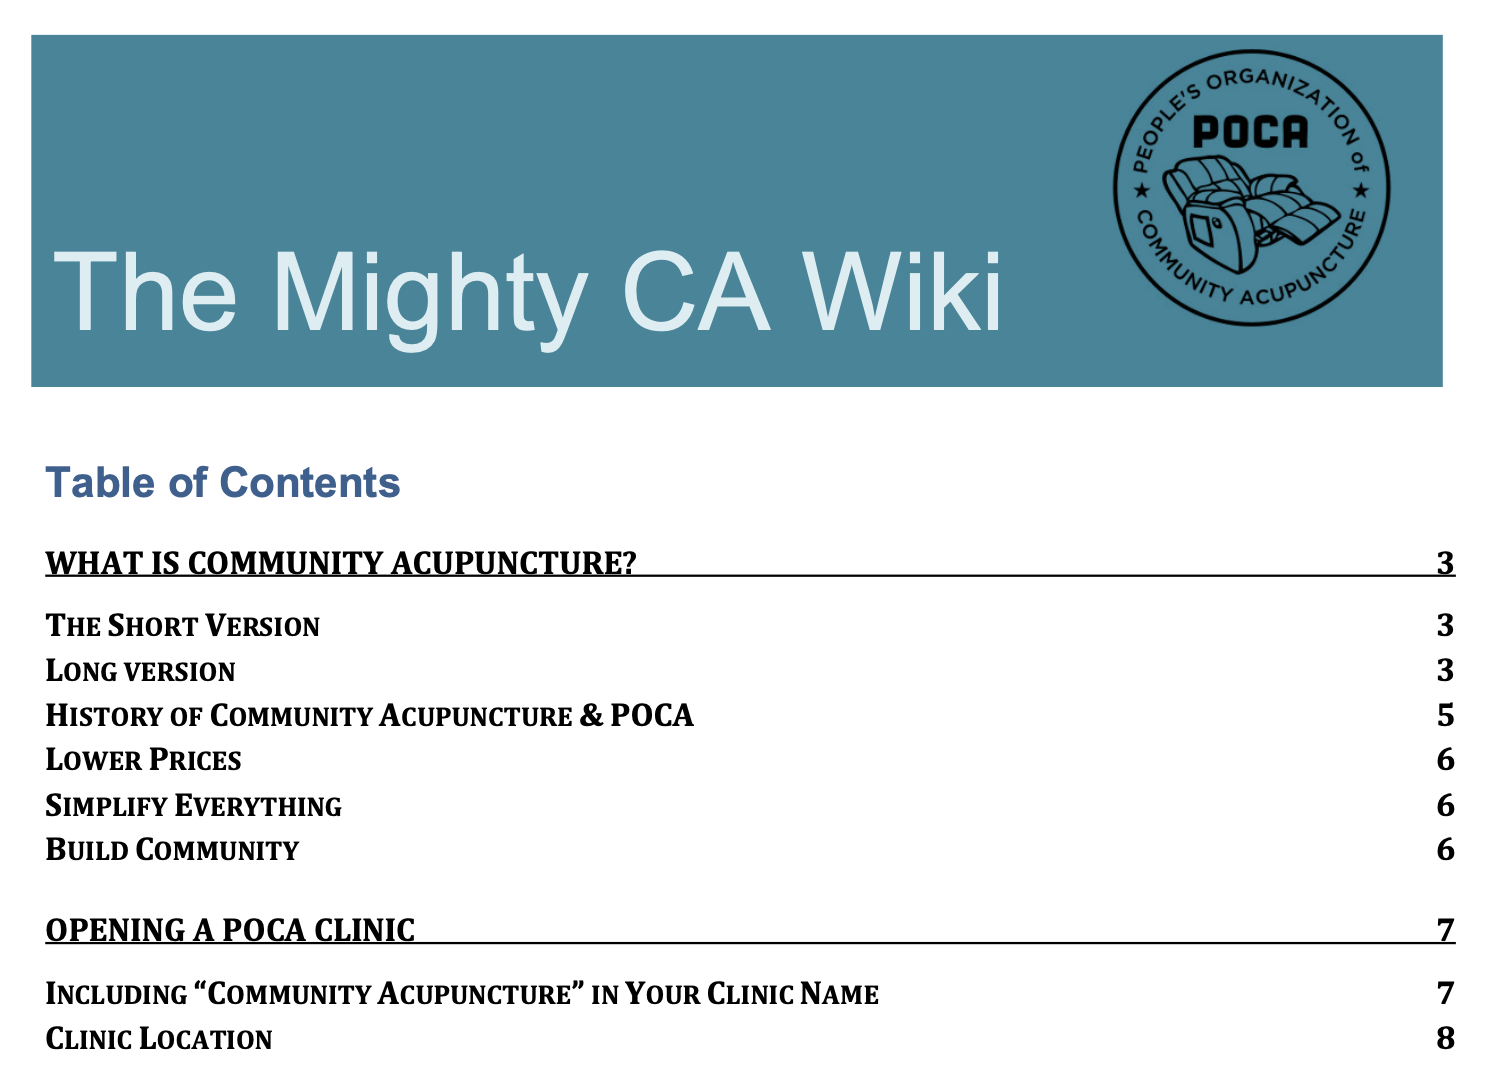 Image of the first page of the Mighty CA Wiki, showing the table of contents